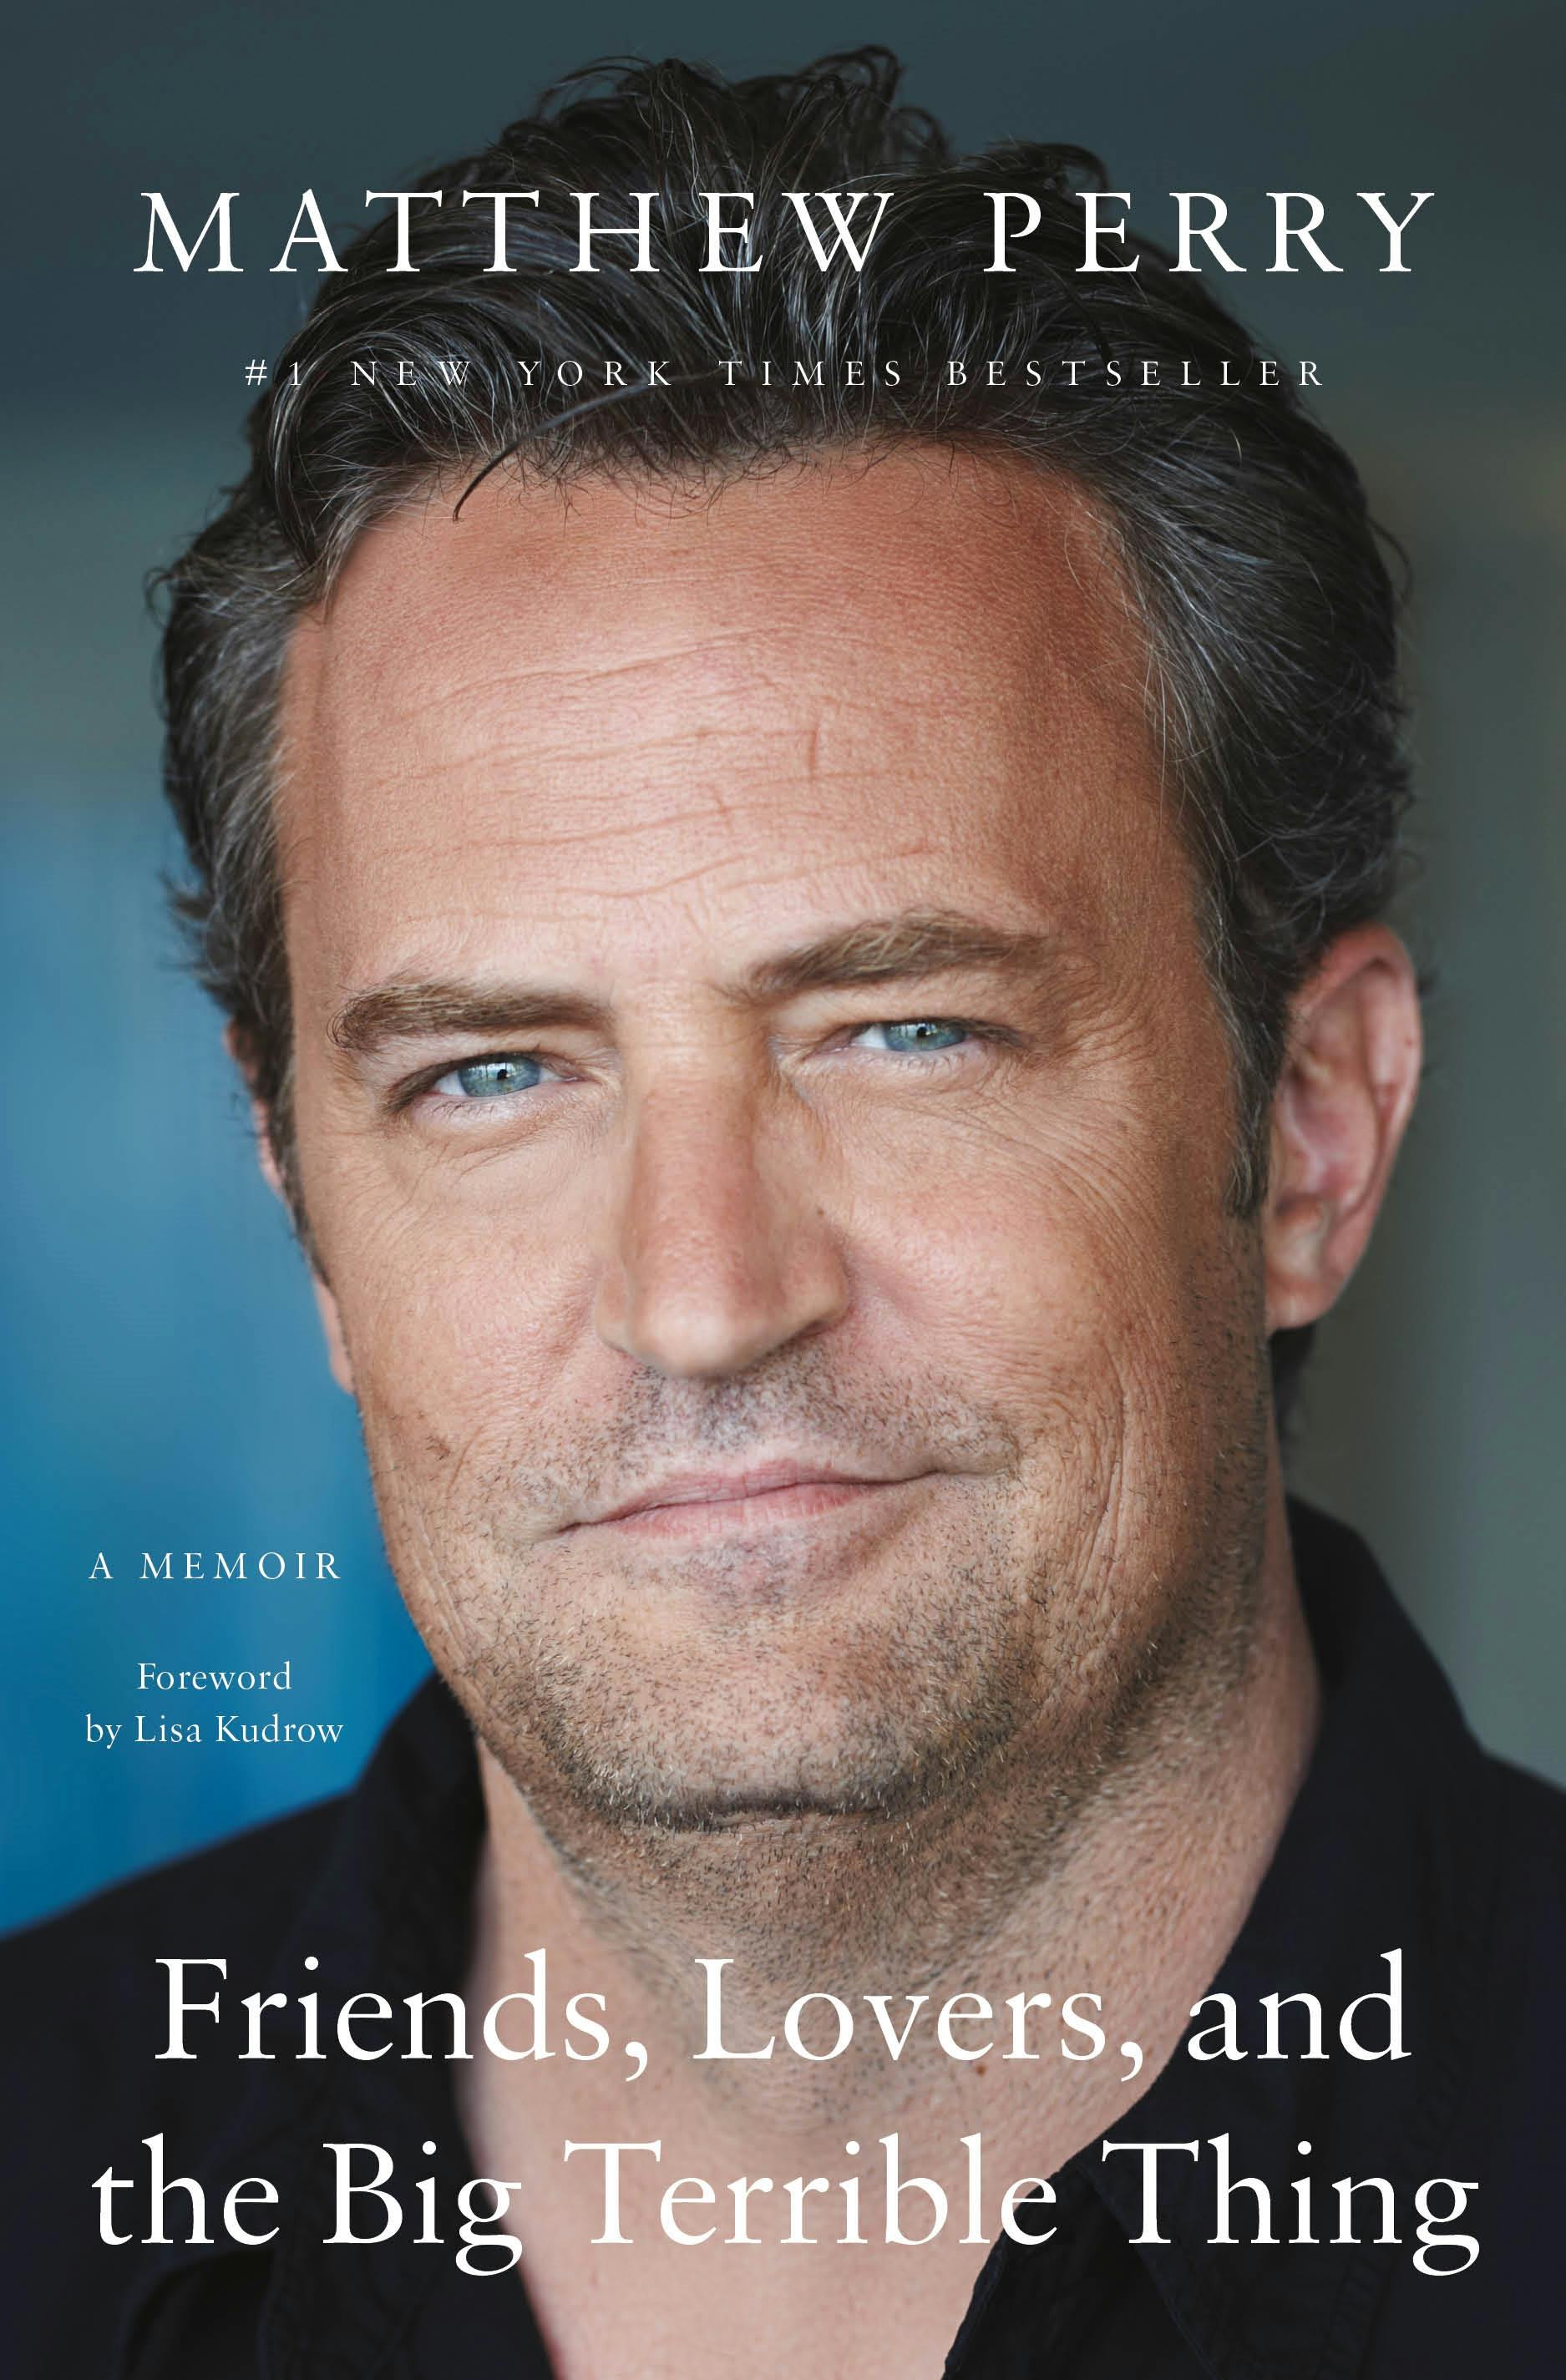 Matthew Perry's Friends, Lovers, and the Big Terrible Thing